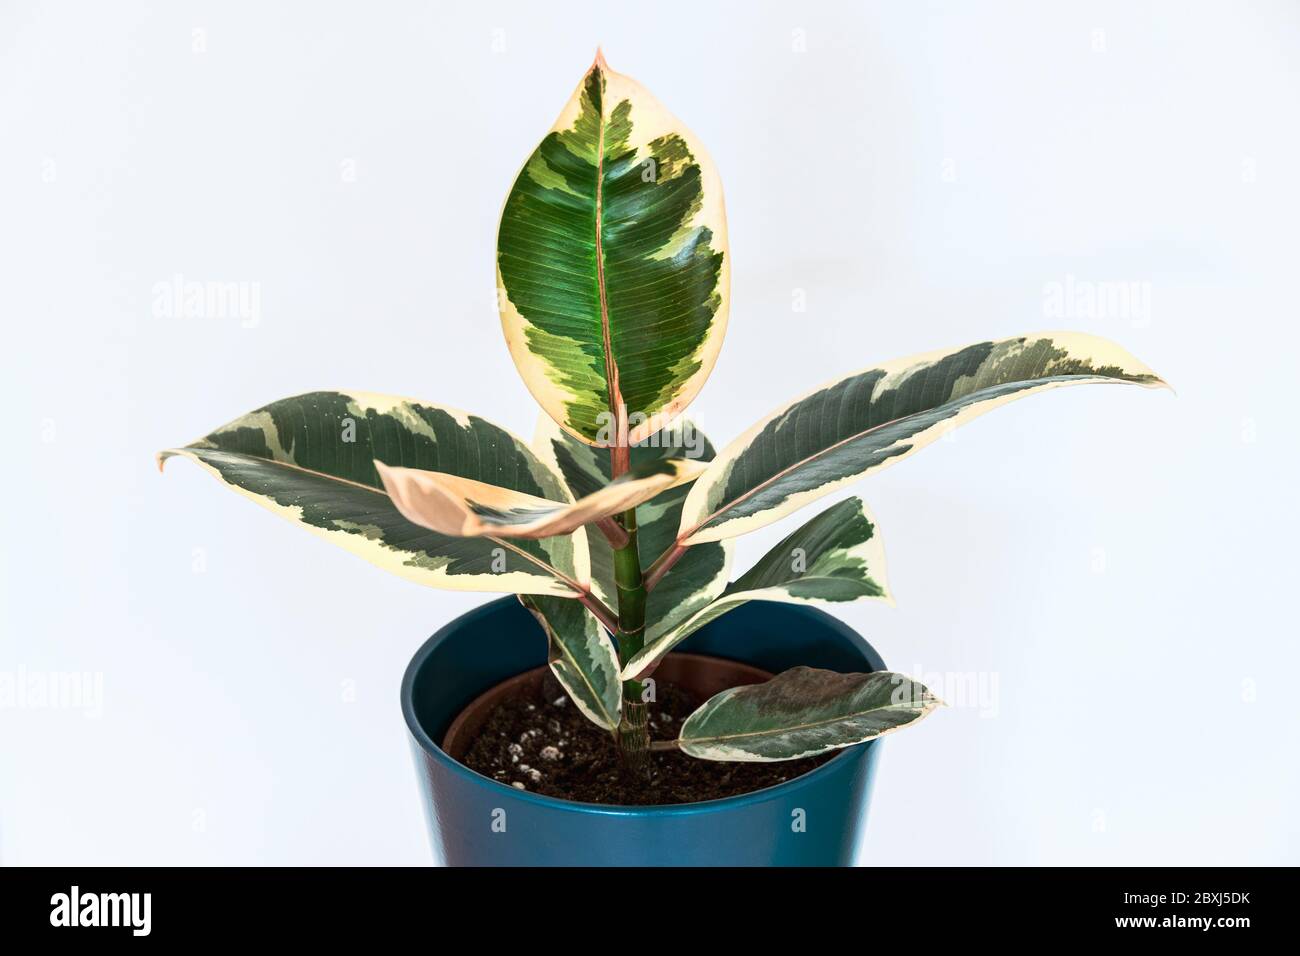 Variegated foliage of ficus elastica var. 'Tineke' houseplant on a white background. Trendy houseplant detail in a blue pot against bright backdrop. Stock Photo